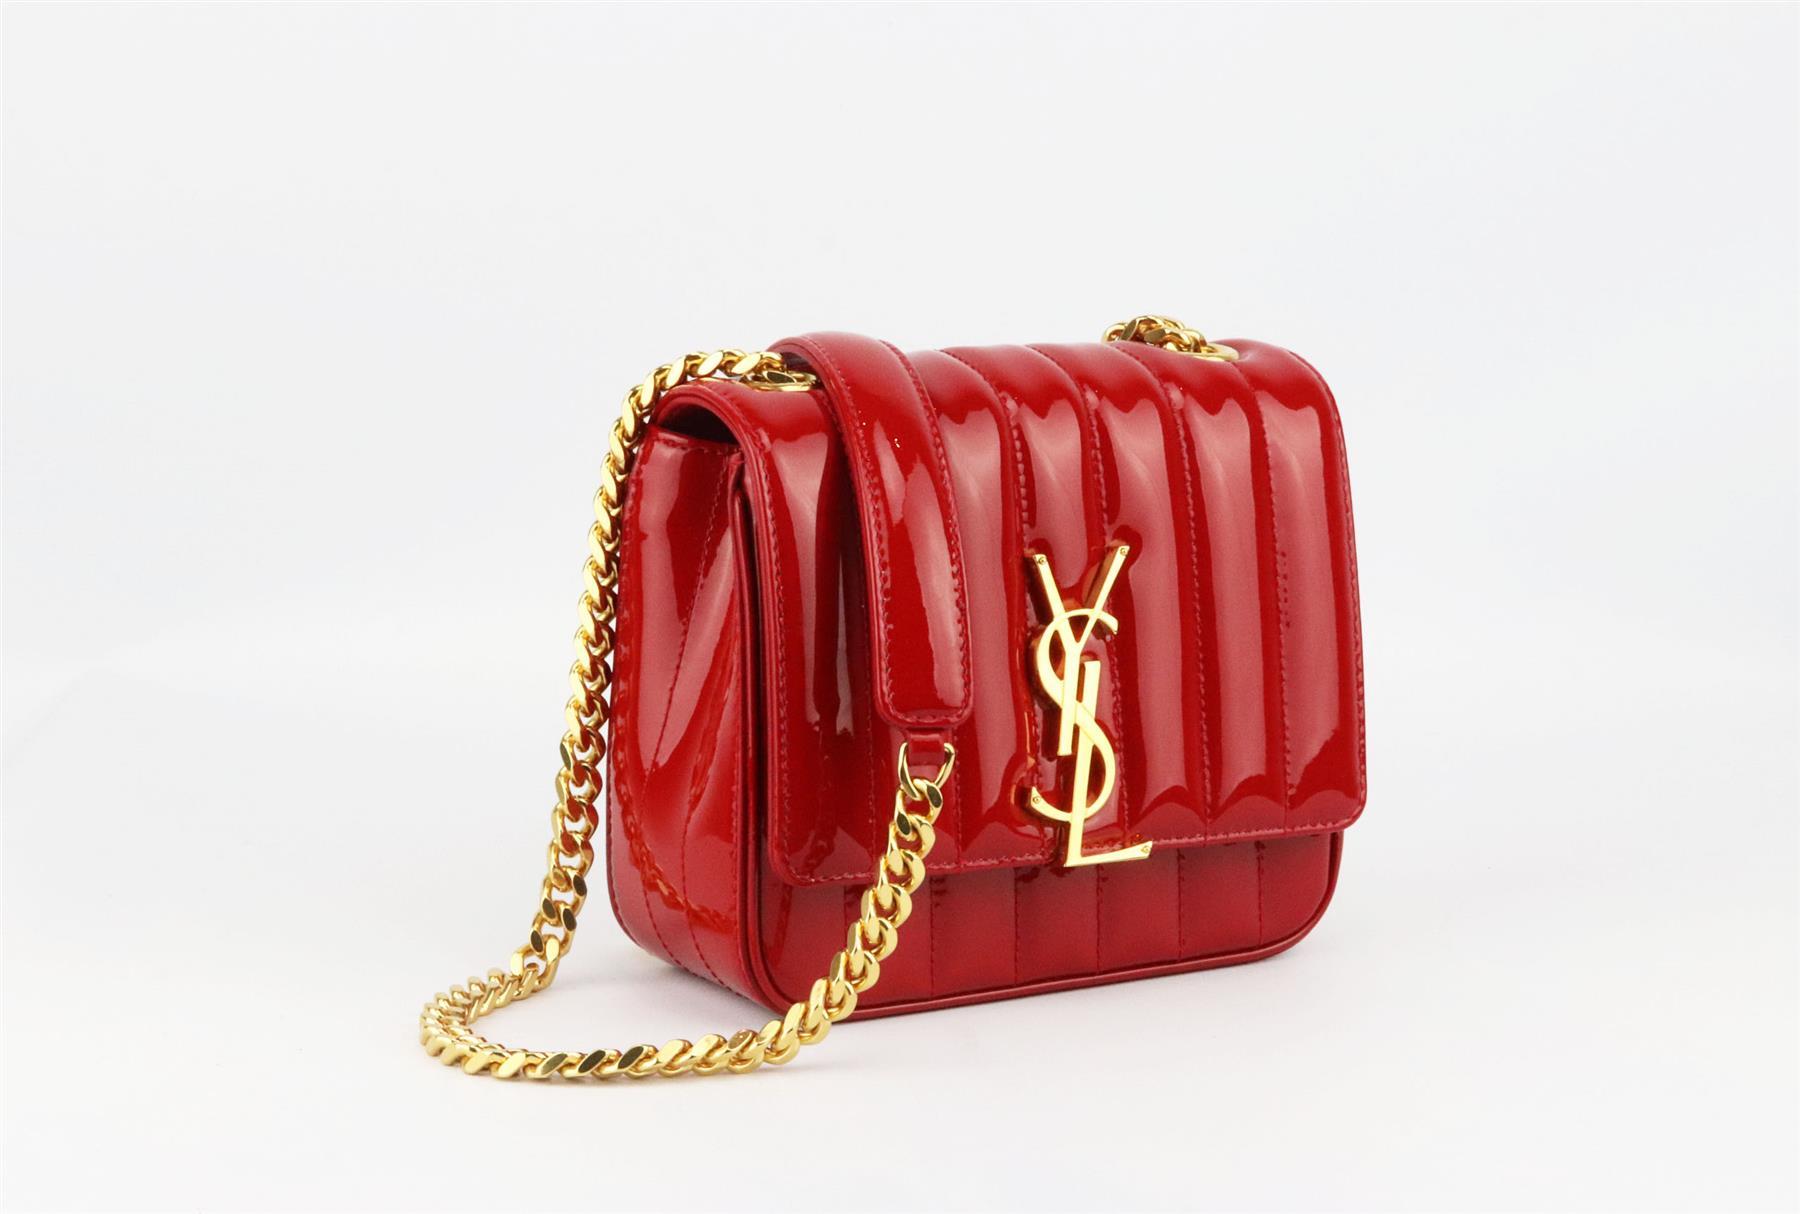 This 'Vicky' bag by Saint Laurent is made in Italy from shiny red patent-leather, this quilted accessory is decorated with the iconic 'YSL' plaque in gold to match the sliding chain strap, it also has a discreet slip pocket at the back. Red patent